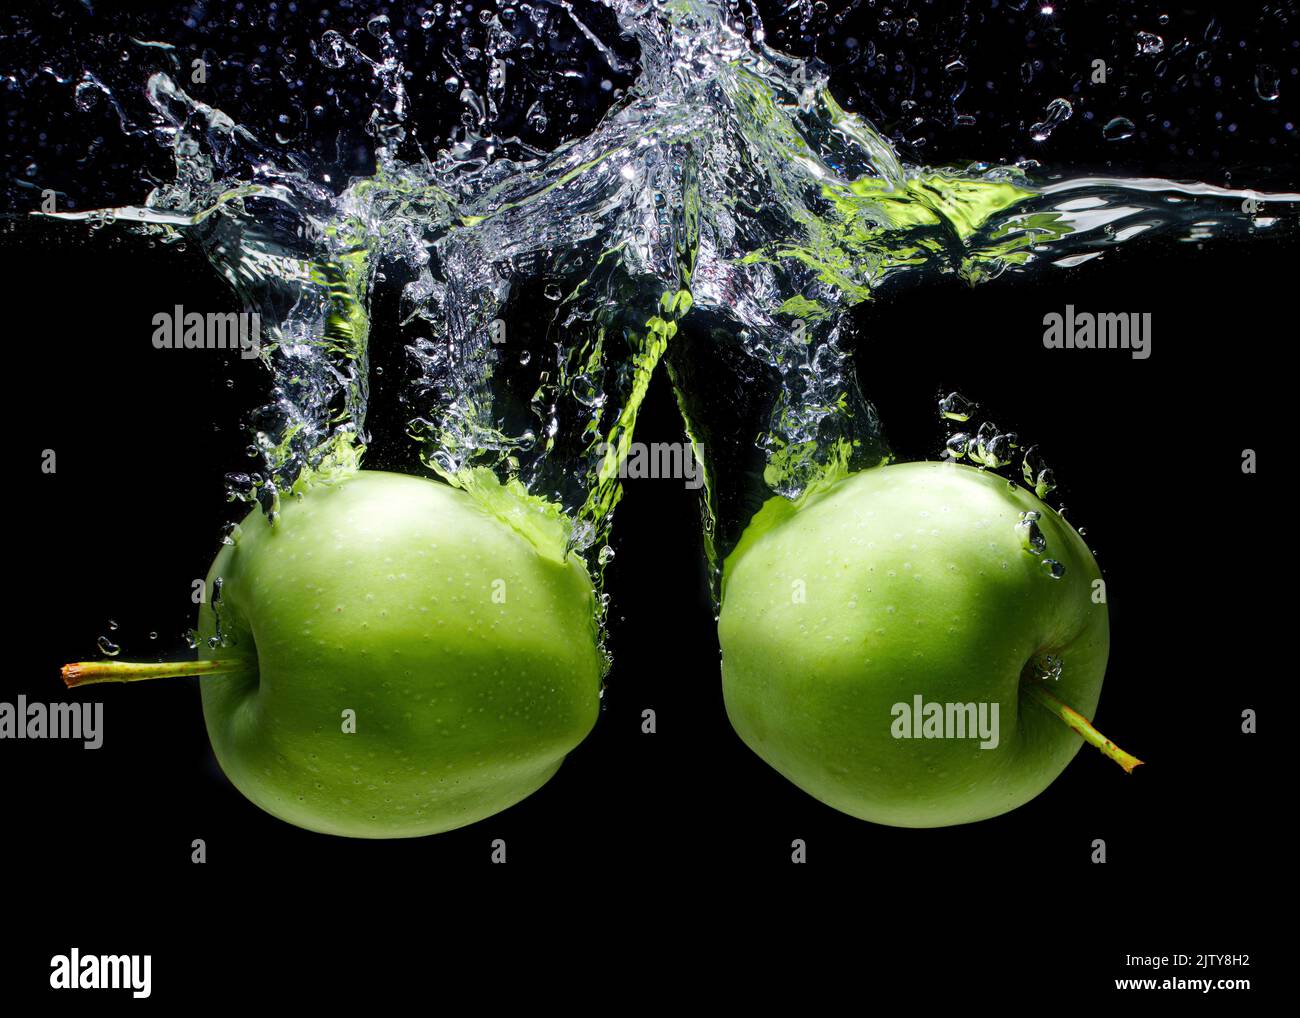 Green apples dropped in water with splashes and bubbles isolated on black background, close-up Stock Photo